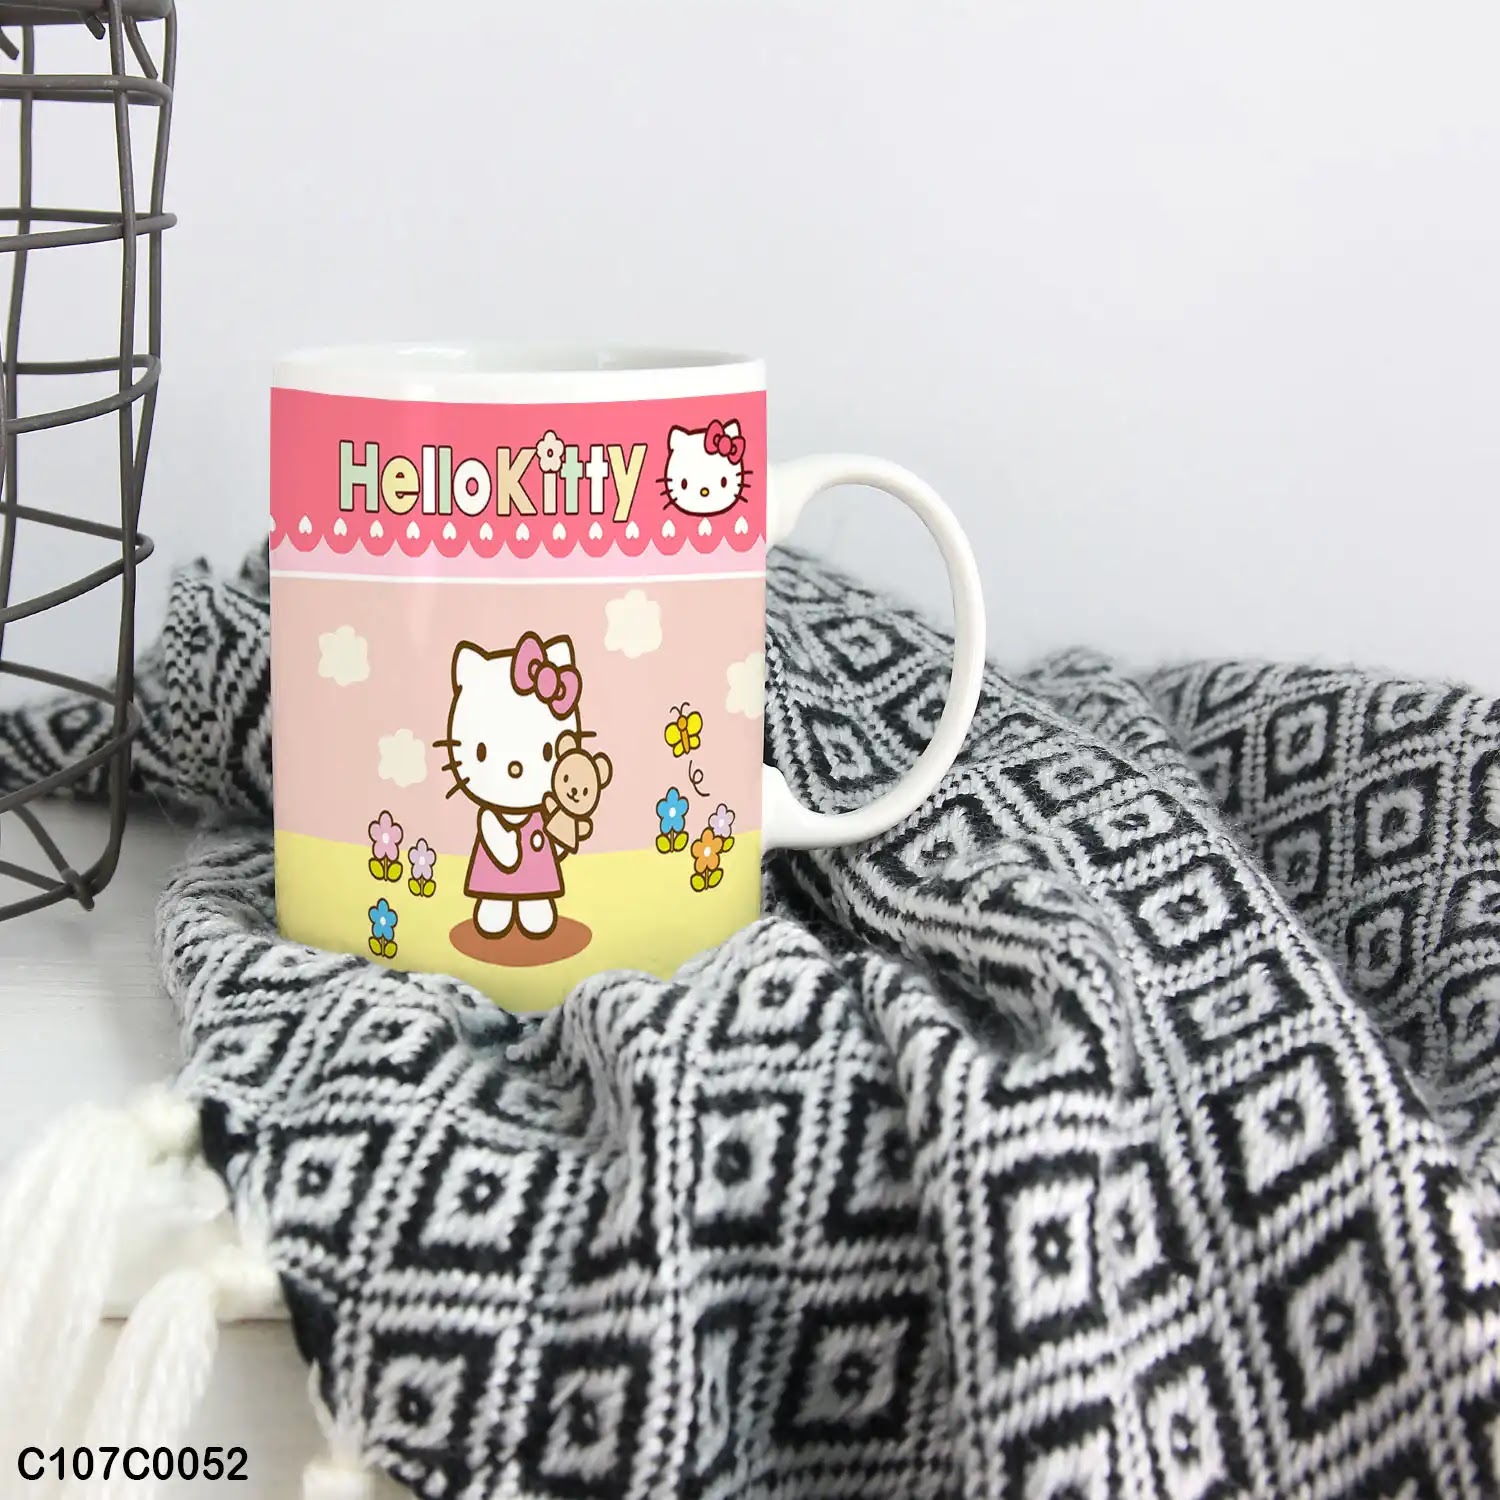 A pink mug (cup) printed with an image of "Hello Kitty" for children